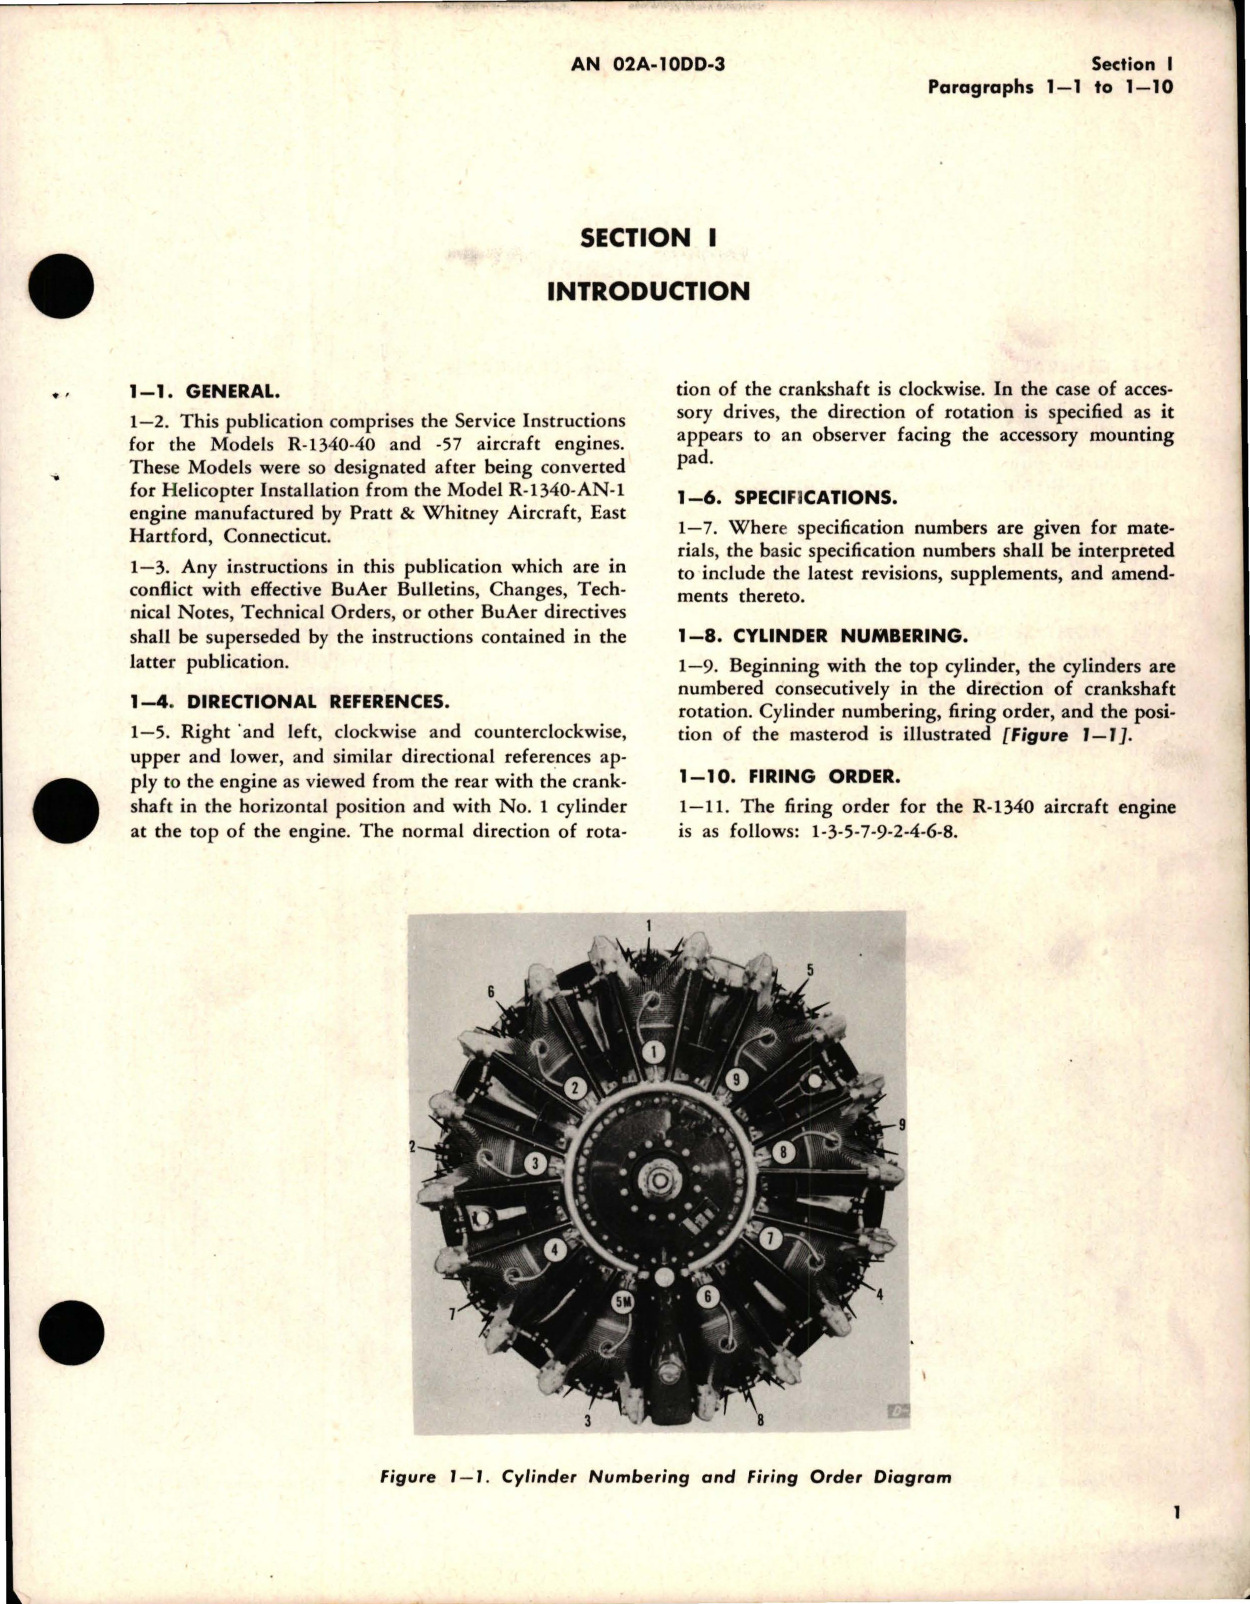 Sample page 7 from AirCorps Library document: Overhaul Instructions for R-1340-40 and R-1340-57 Engines